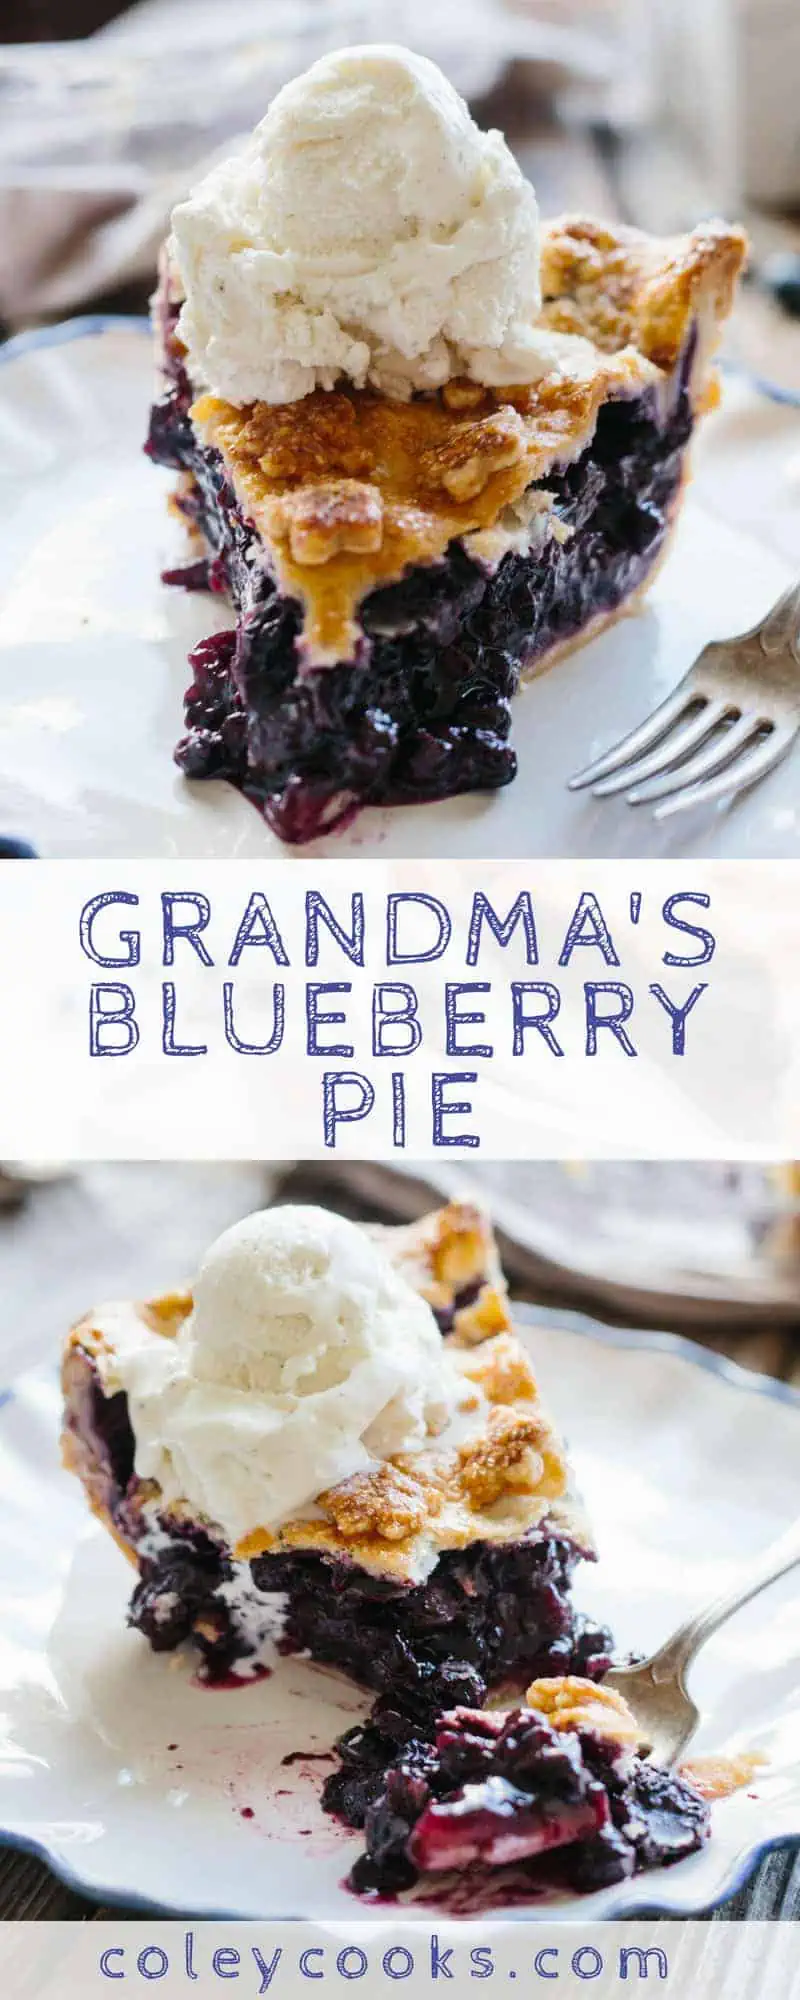 Grandma's Blueberry Pie | This simple recipe for my grandma's blueberry pie is a summer classic! Perfect for 4th of July. #easy #summer #dessert #recipe #4thofjuly #blueberry #pie | ColeyCooks.com